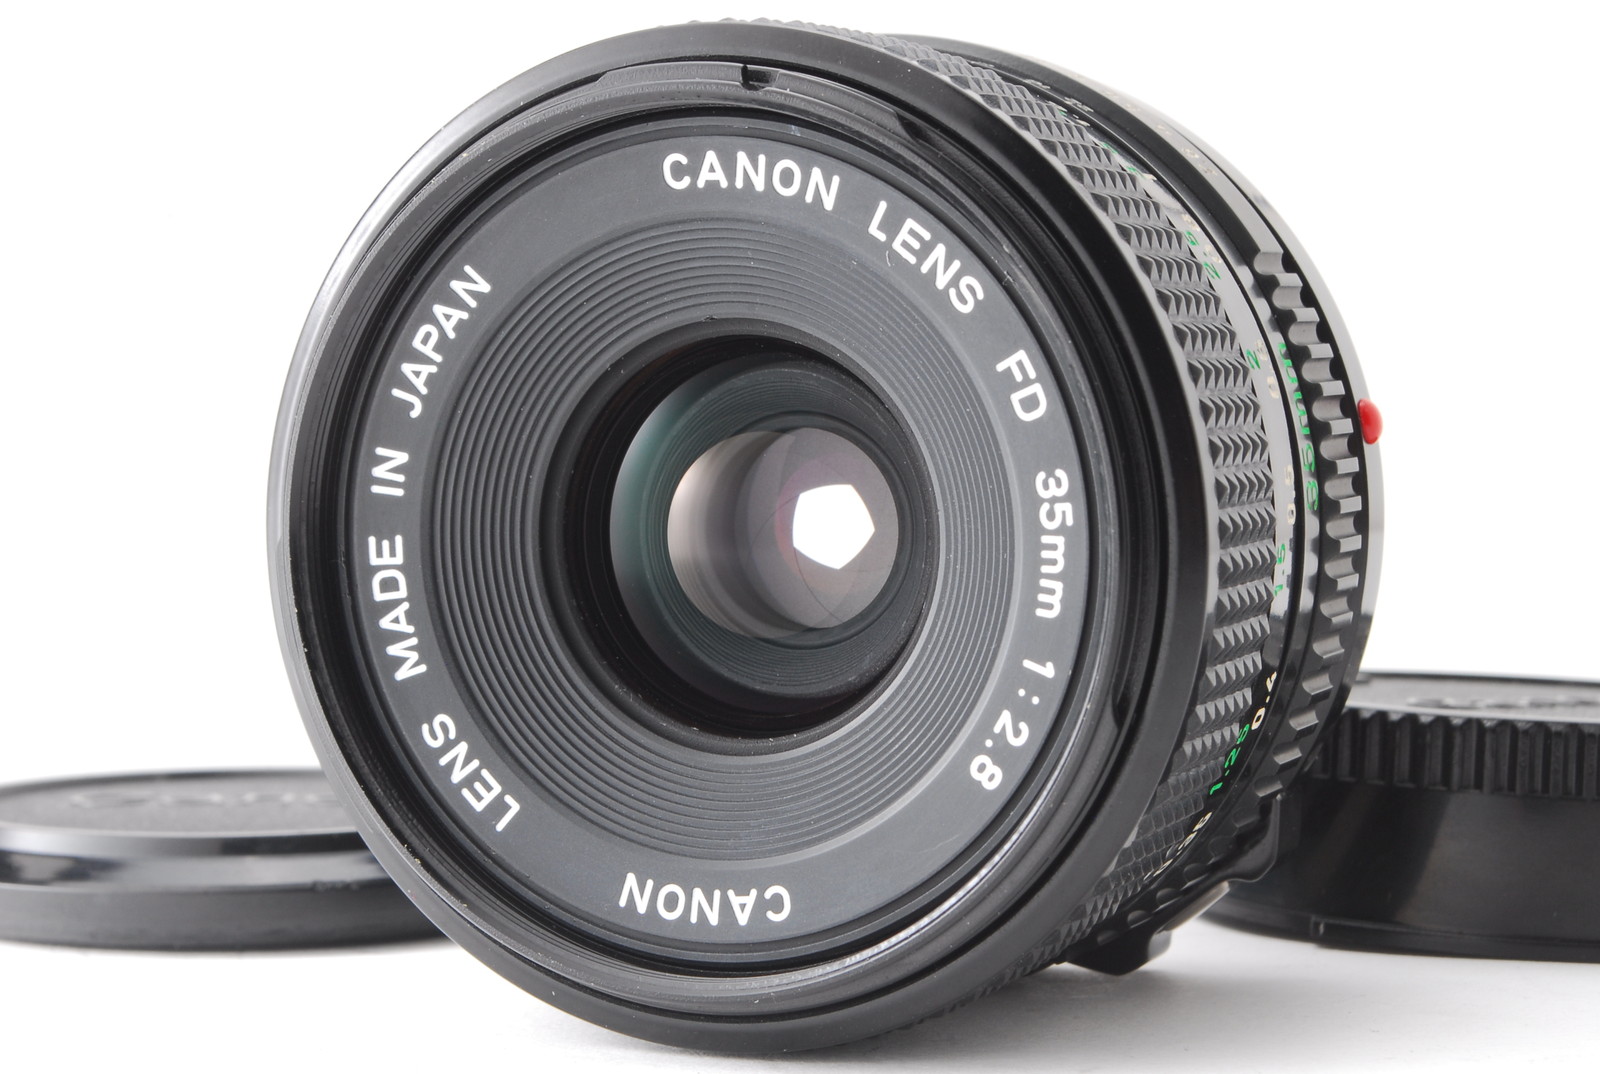 PROMOTION. EXC+++++ Canon New FD NFD 35mm f/2.8, Front Cap, Rear Cap from Japan